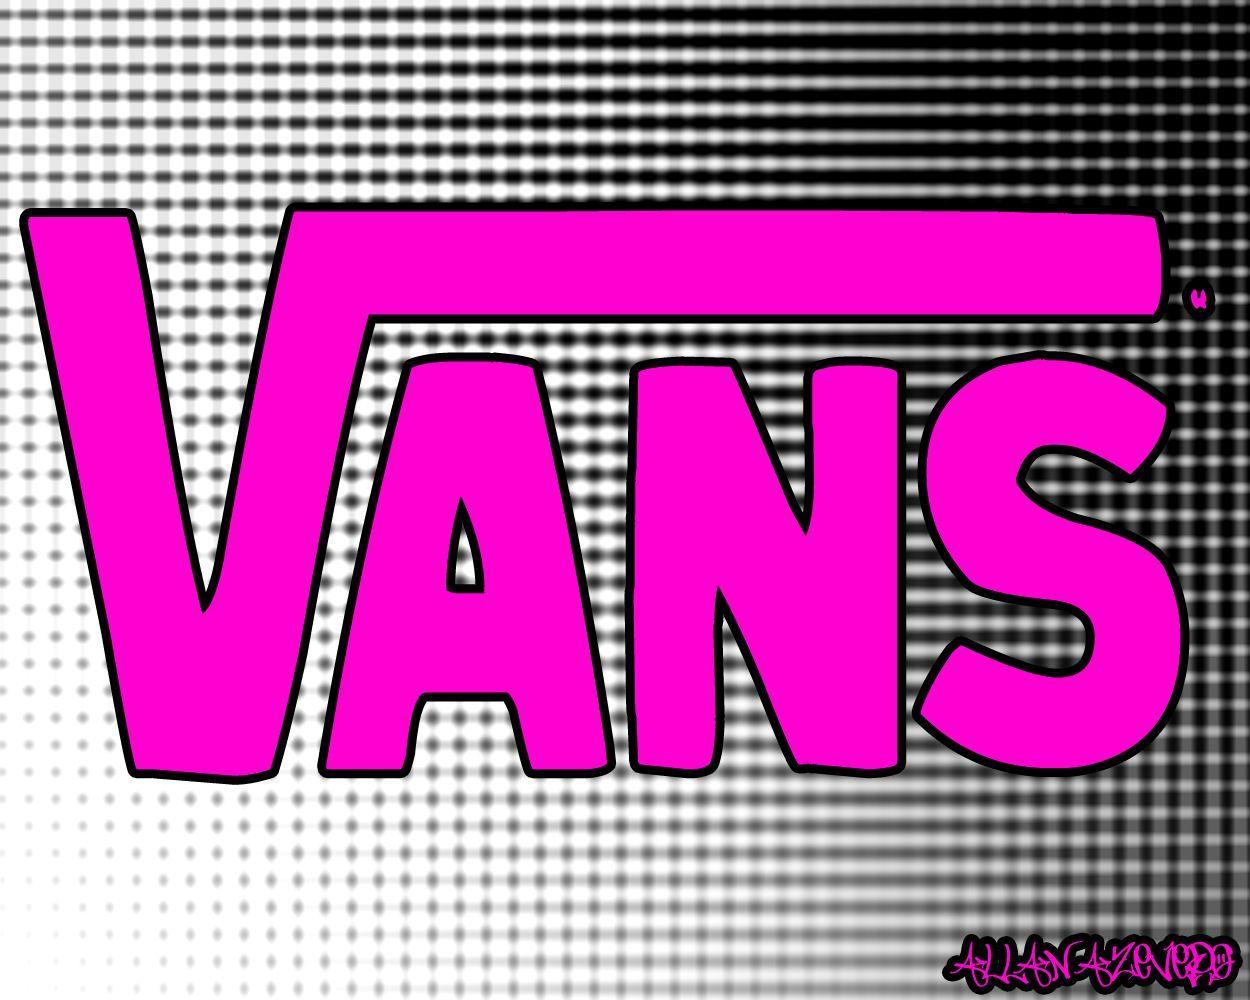 Pink Vans Logo - Cool Vans Logo pink. Vans Logo Wallpaper Pink Image & Picture